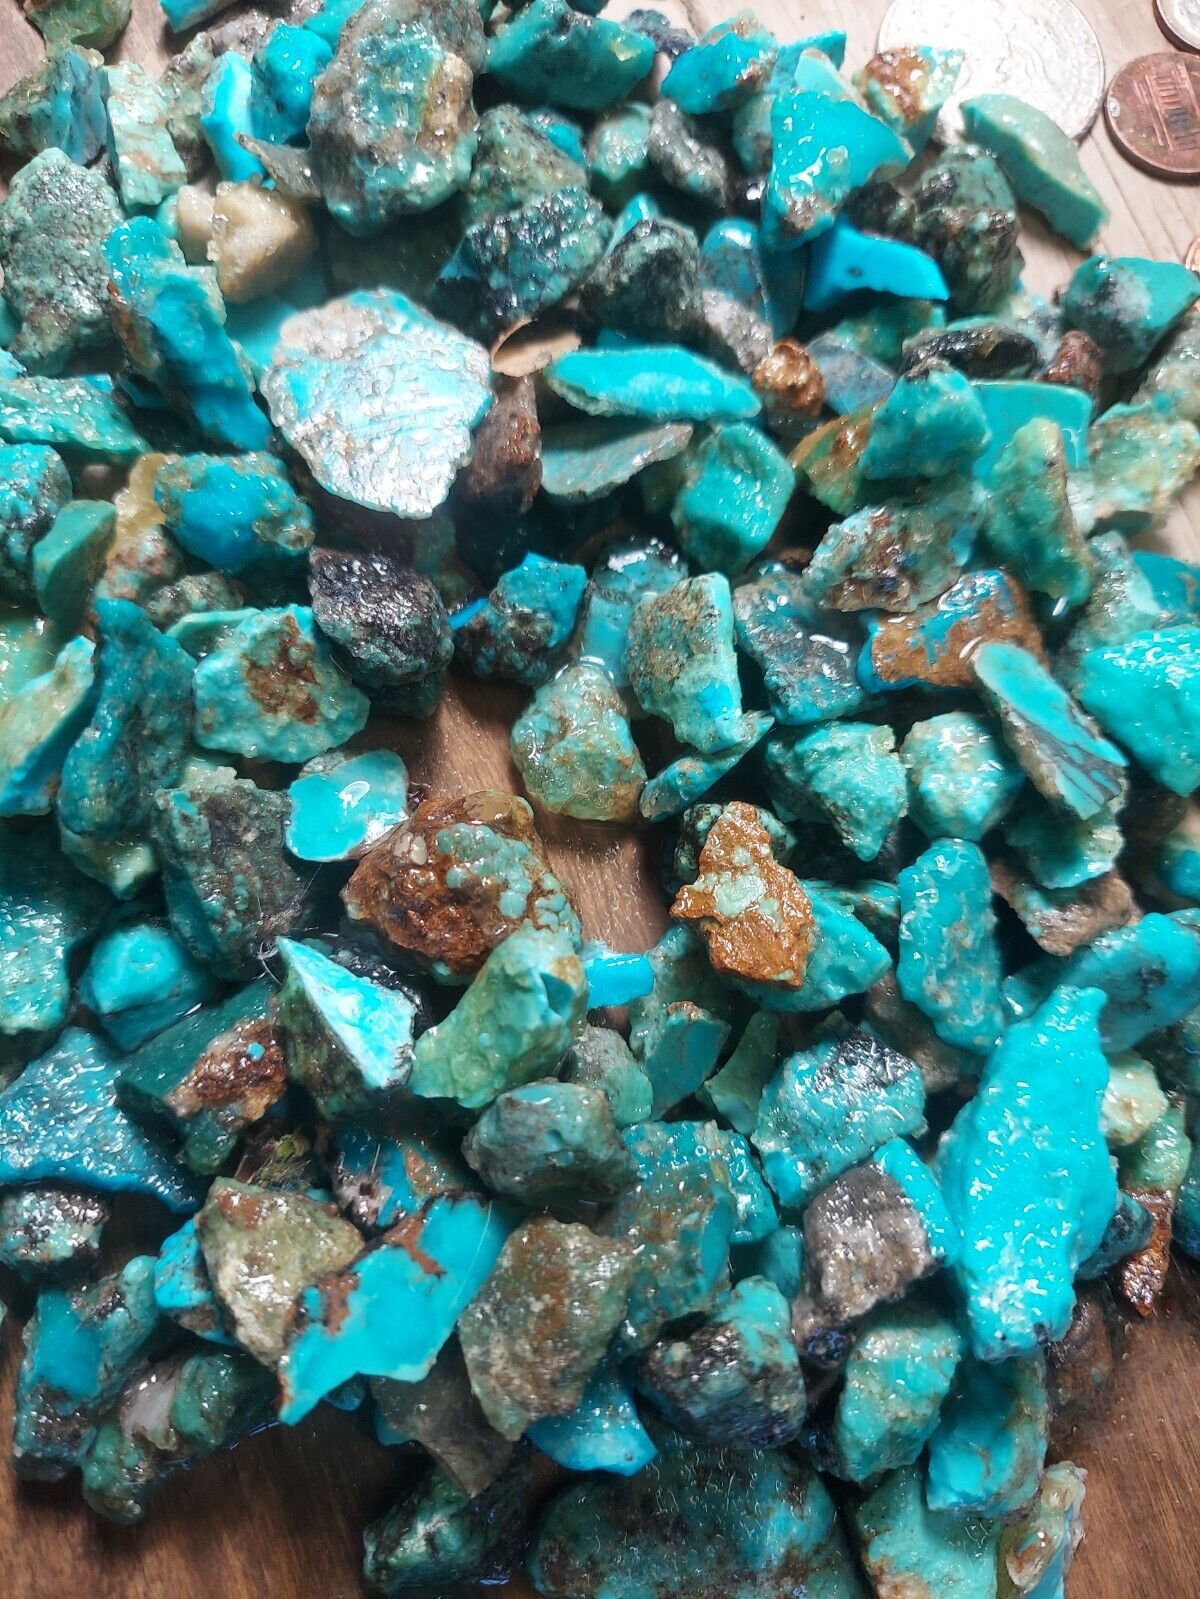 Bisbee natural turquoise real.blast from the past vintage wow spring special